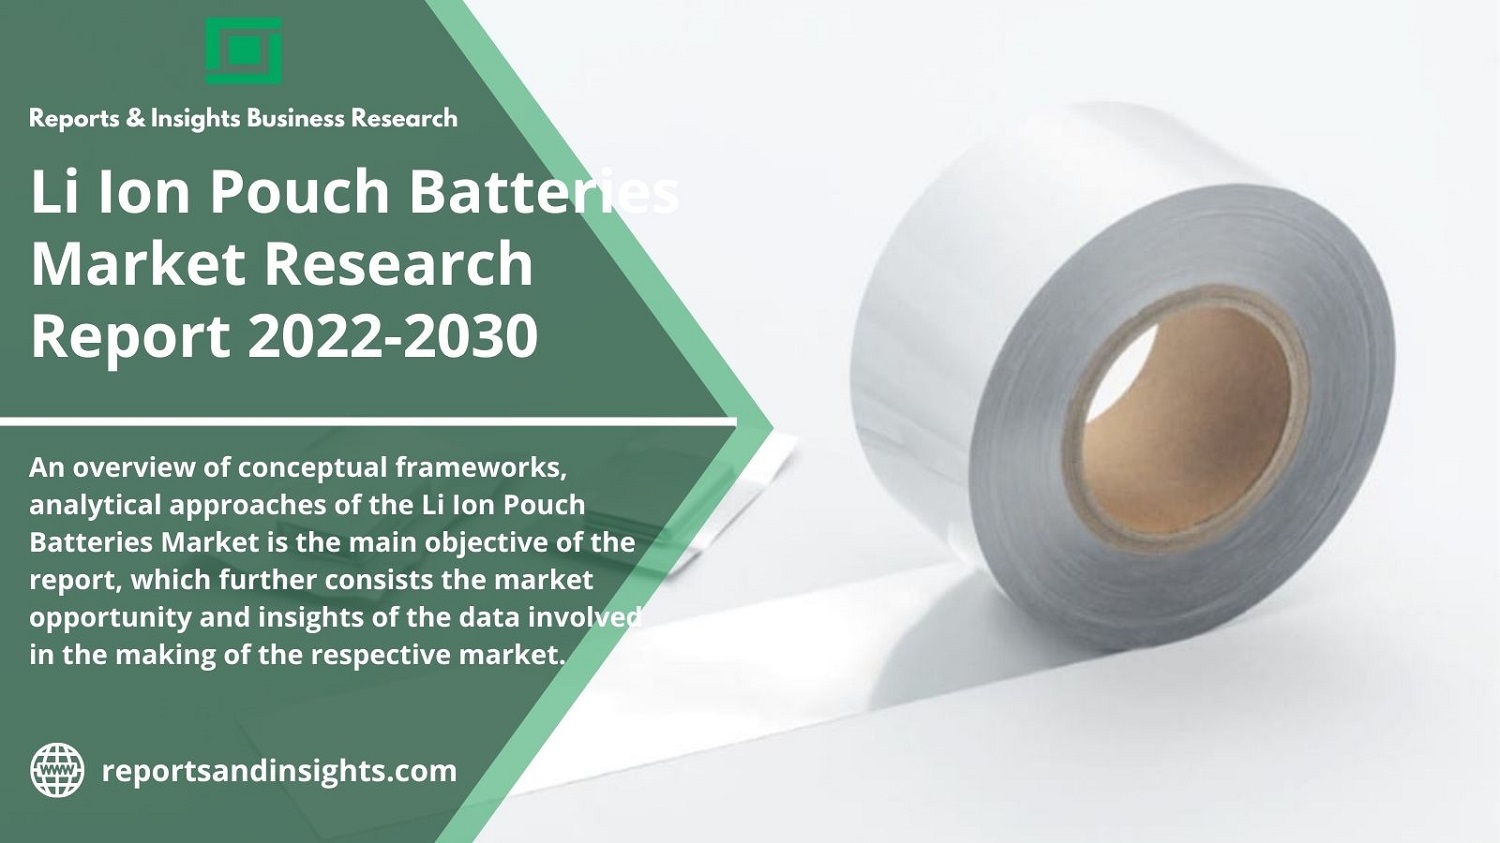 Li Ion Pouch Batteries Market Research Report 2022 | Global Development Strategy, Revenue by Key Vendors Demand, Emerging Trends and Forecast 2030 | By R&I